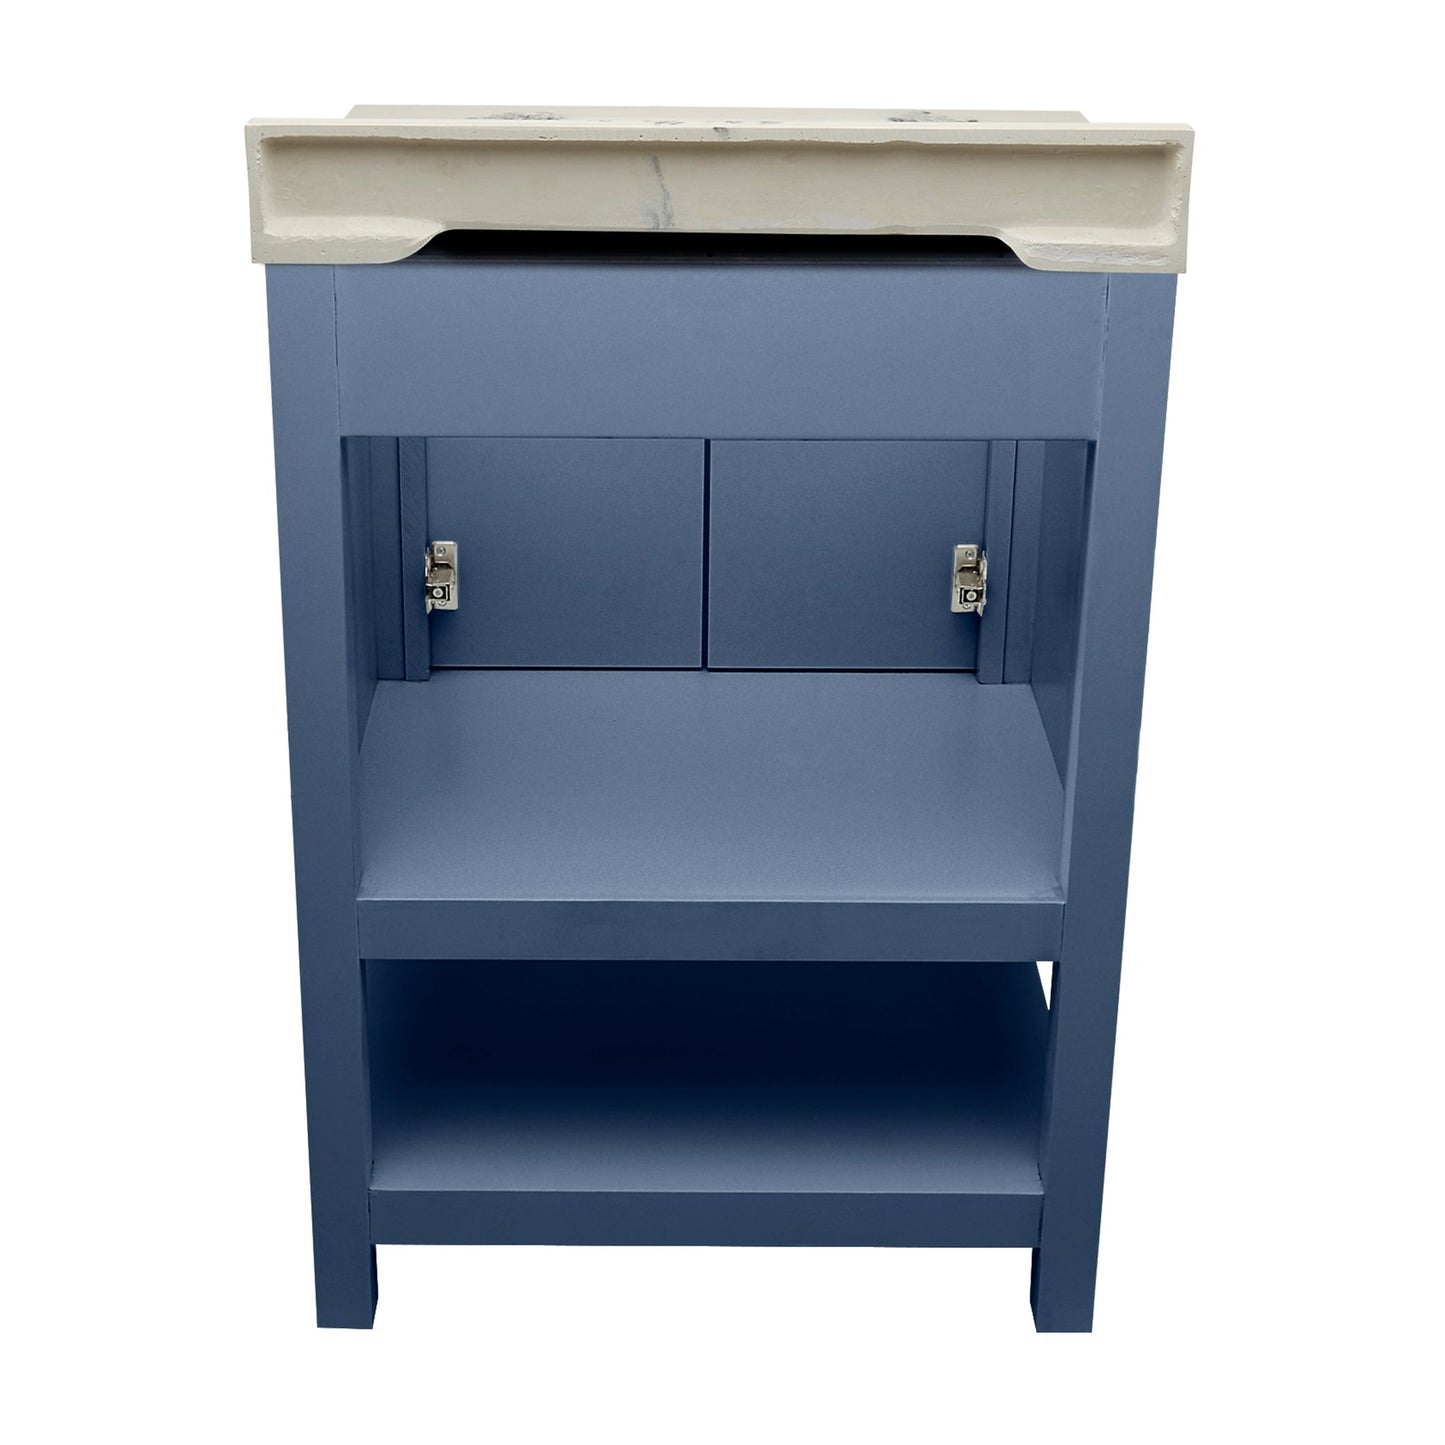 Ella's Bubbles Taos 25" Navy Blue Bathroom Vanity With Carrara White Cultured Marble Top With Backsplash and Sink